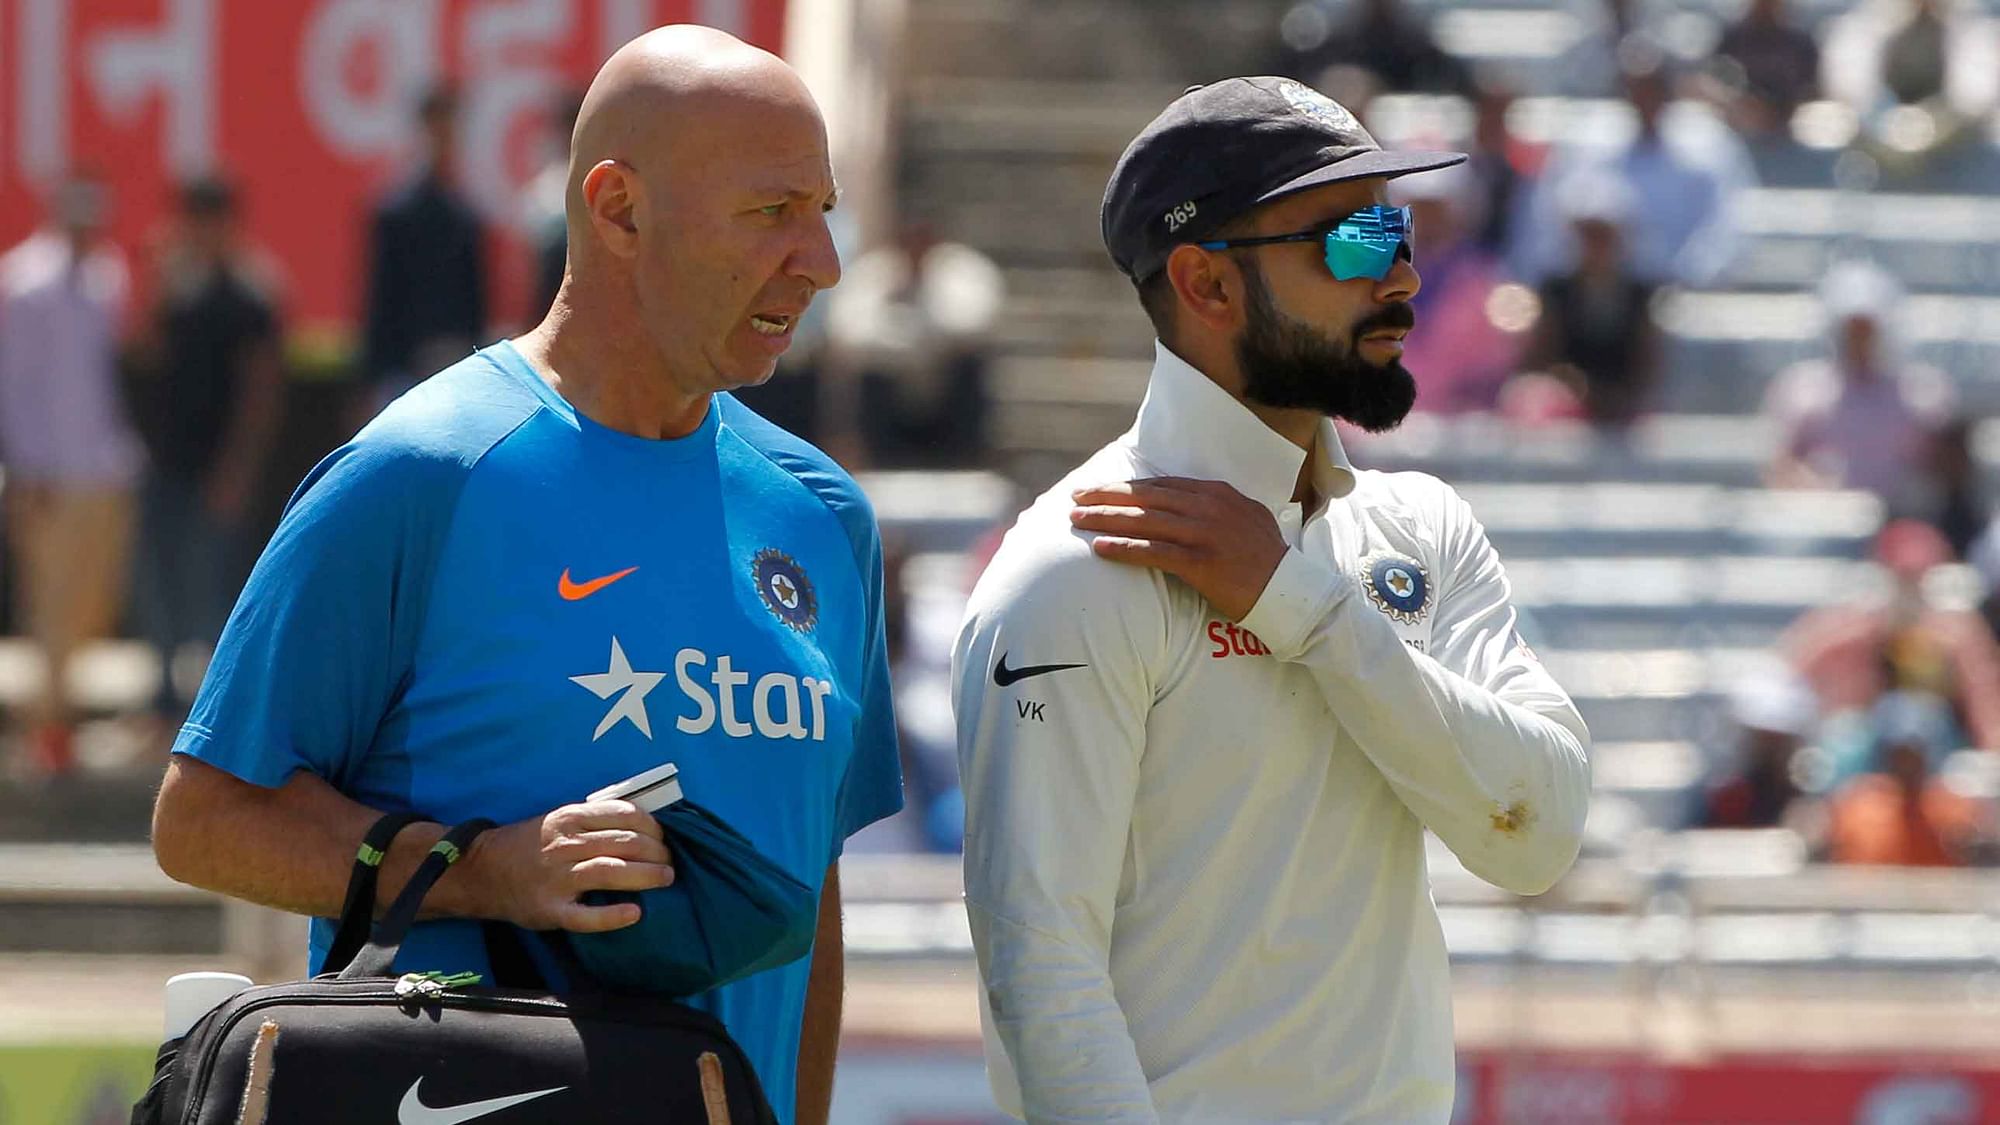 Virat Kohli walks off the field with the physio after injuring his shoulder. (Photo: BCCI)